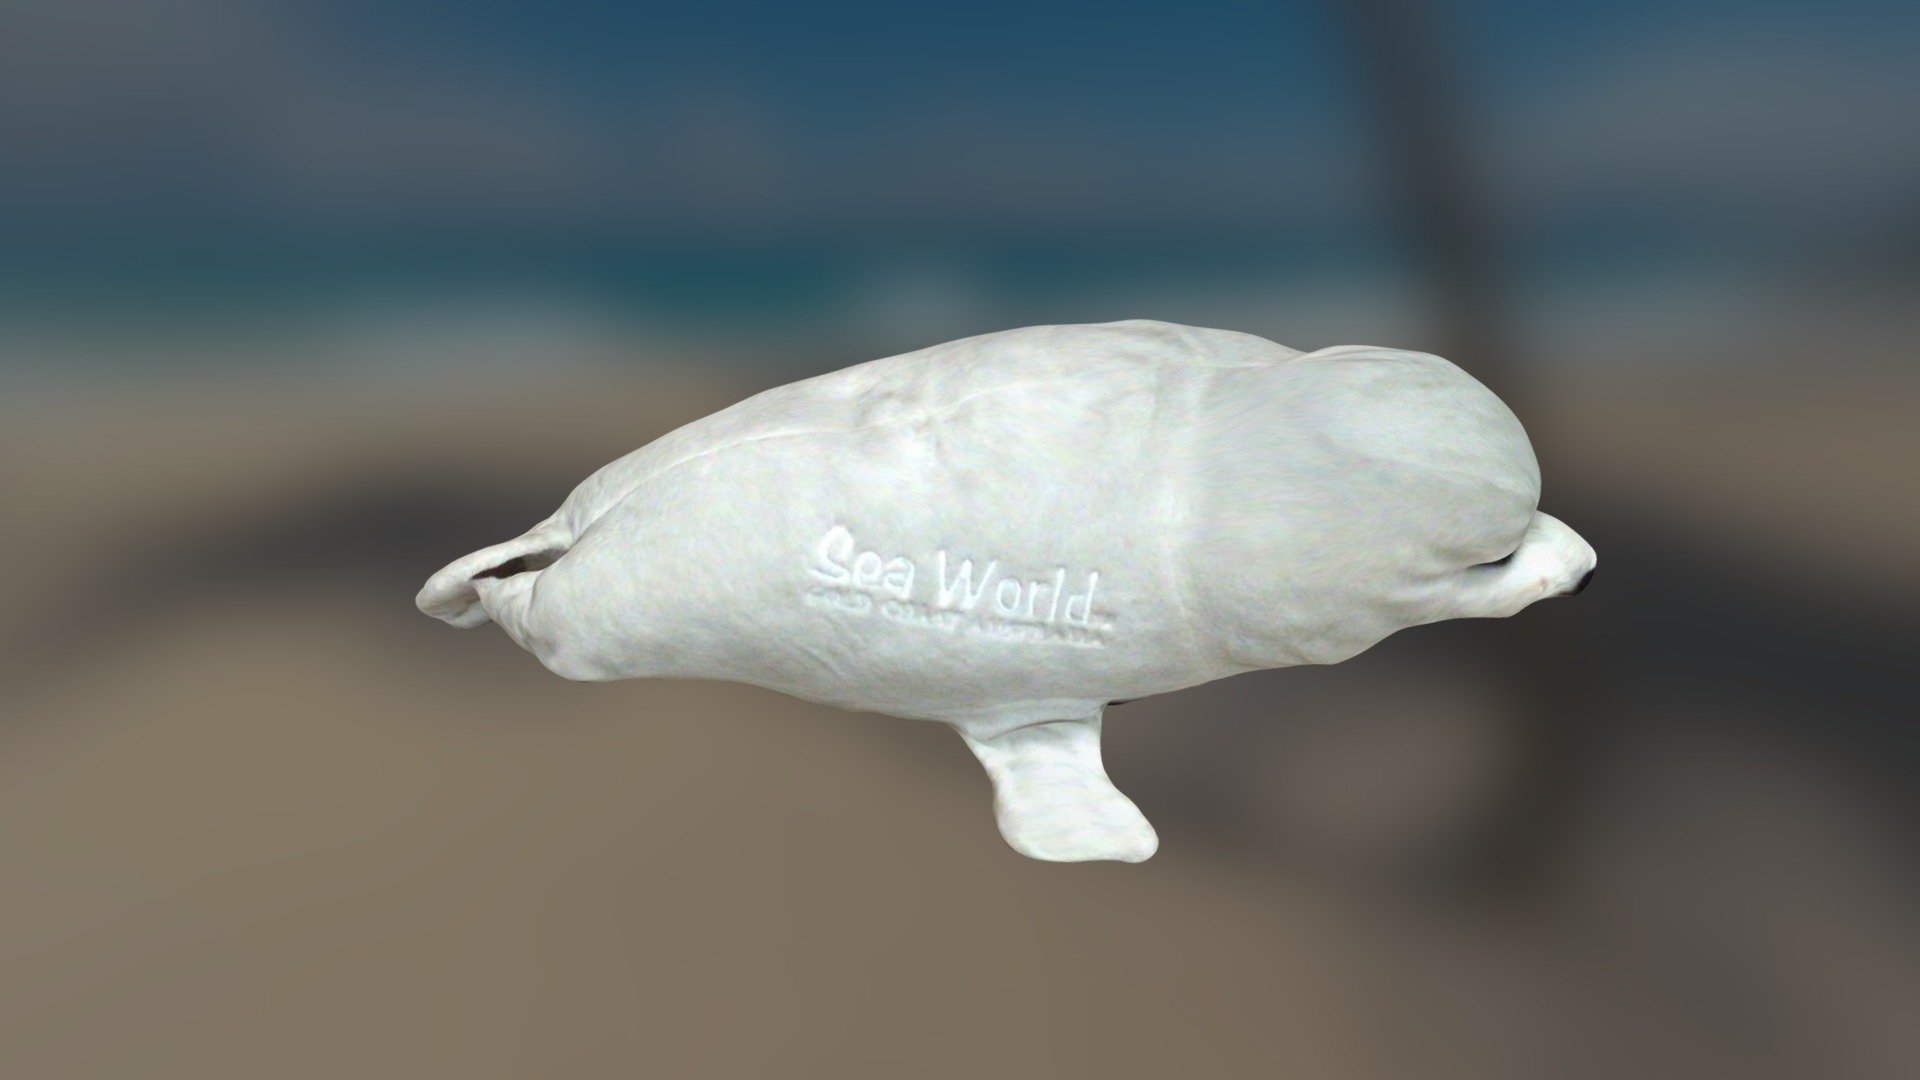 Sea World Seal Doll Download Free 3d Model By Bluerabbit04 [e6eec4a] Sketchfab